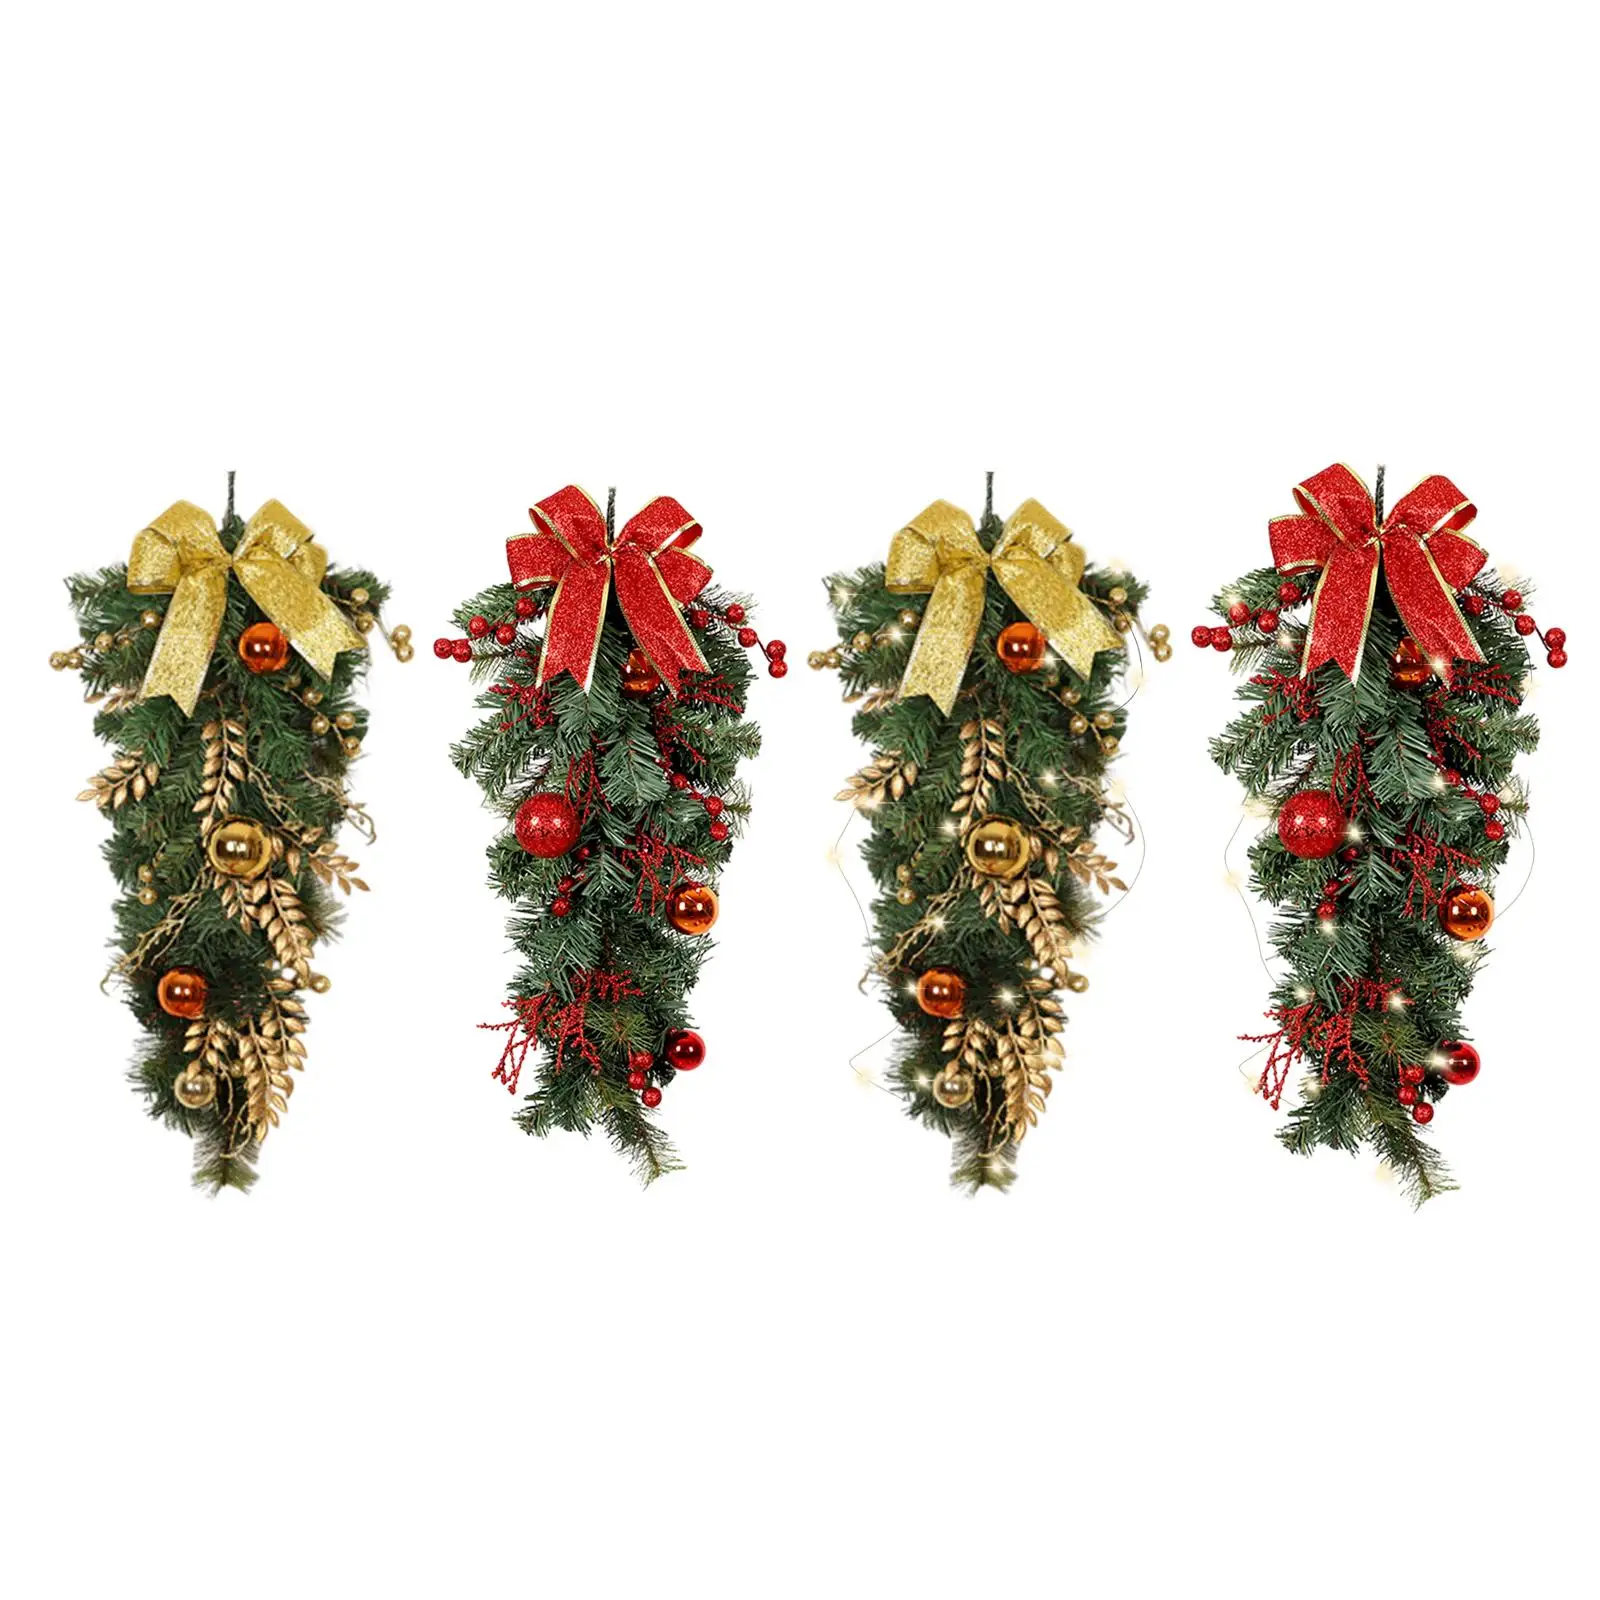 Hanging Christmas Upside Down Tree Door Hanging Wreath Artificial Wreath for Fireplace Windows Hotel Shopping Mall Office